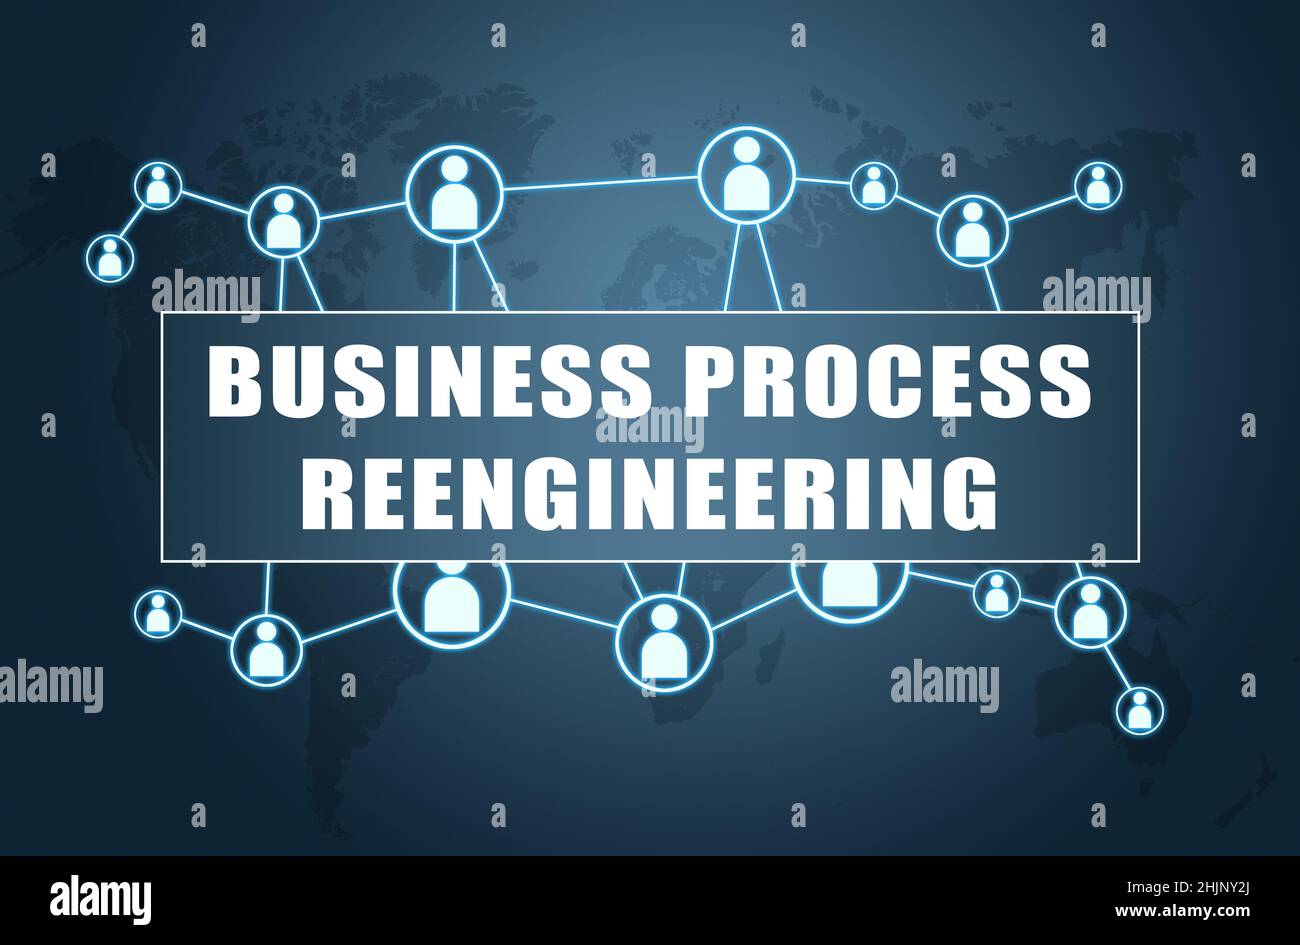 Business Process Reengineering - text concept on blue background with world map and social icons. Stock Photo